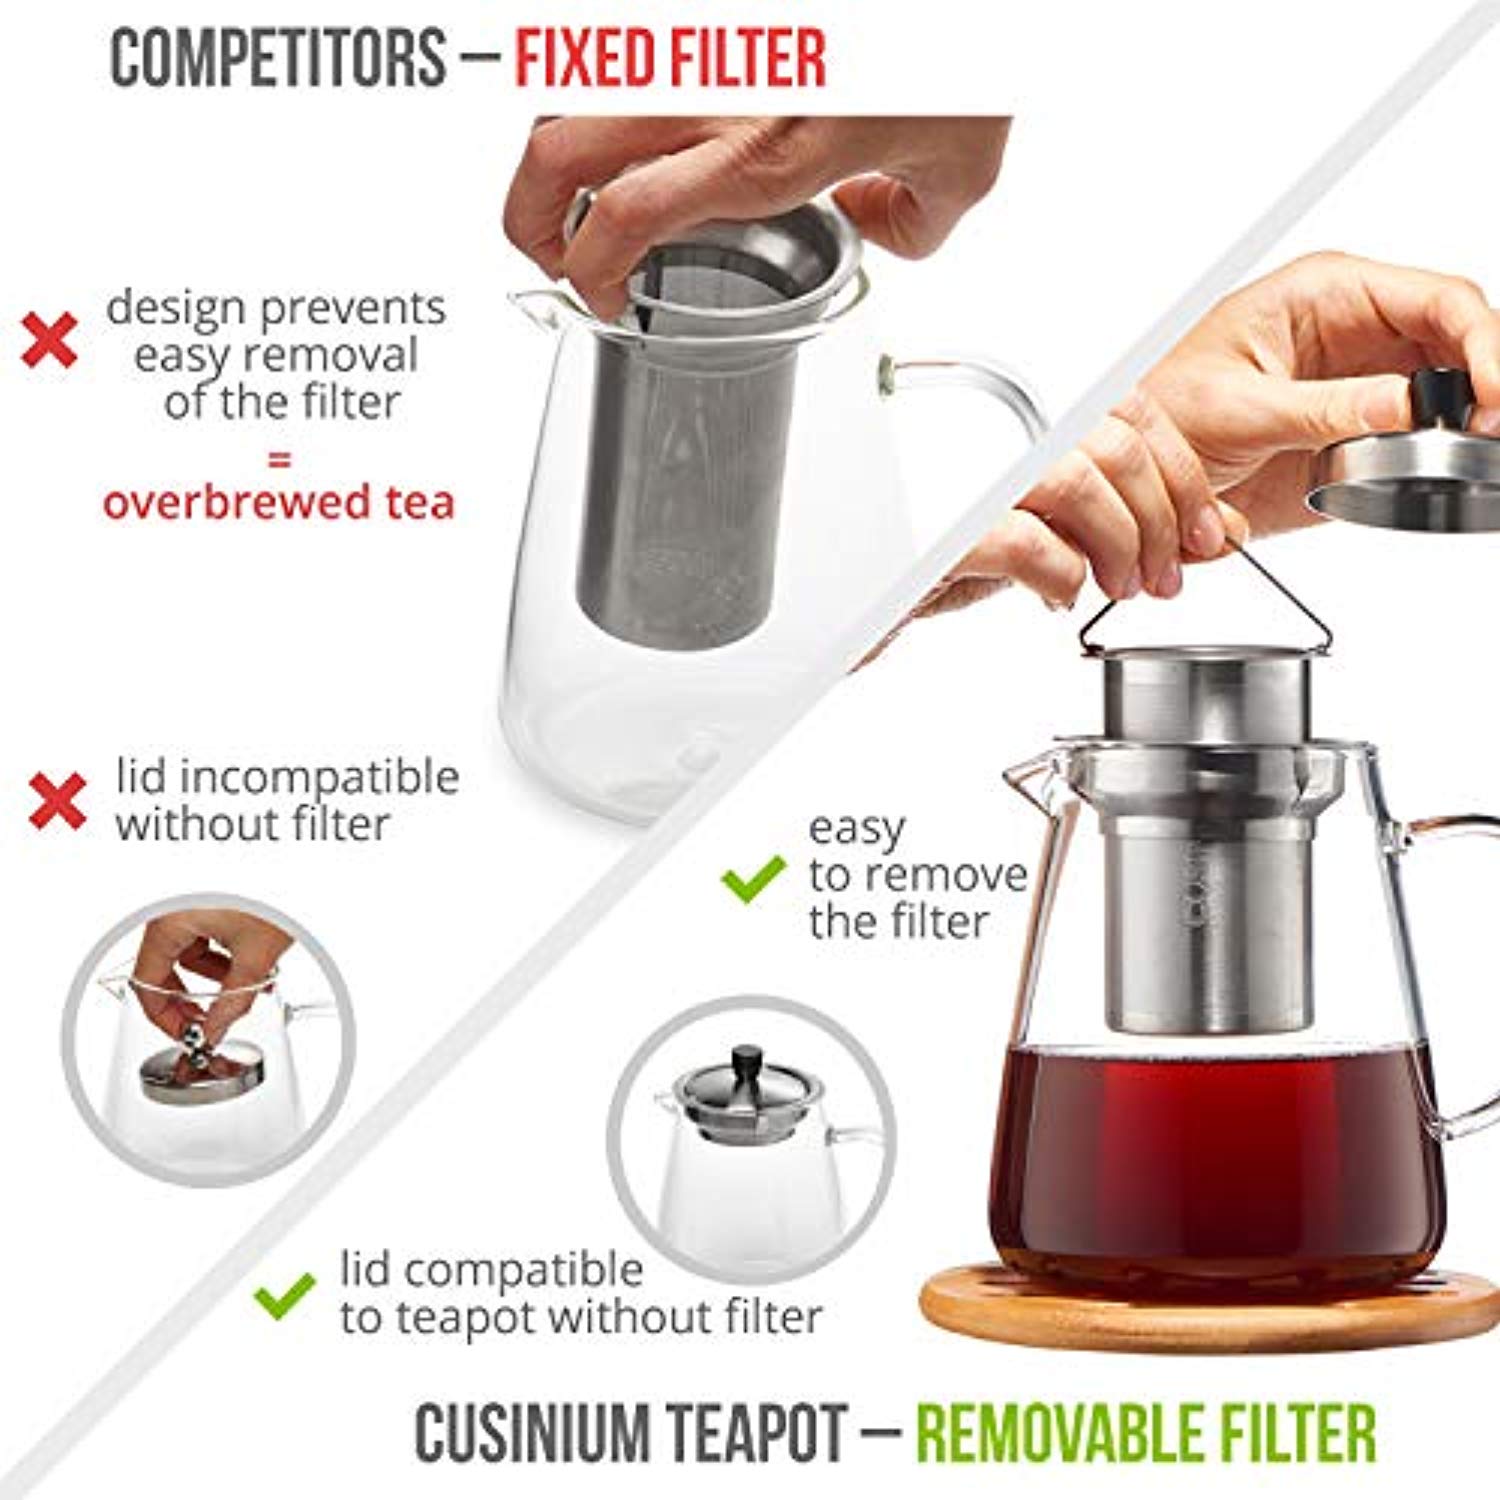 HIWARE 1000ml Glass Teapot with Removable Infuser, Stovetop Safe Tea  Kettle, Blooming and Loose Leaf Tea Maker Set